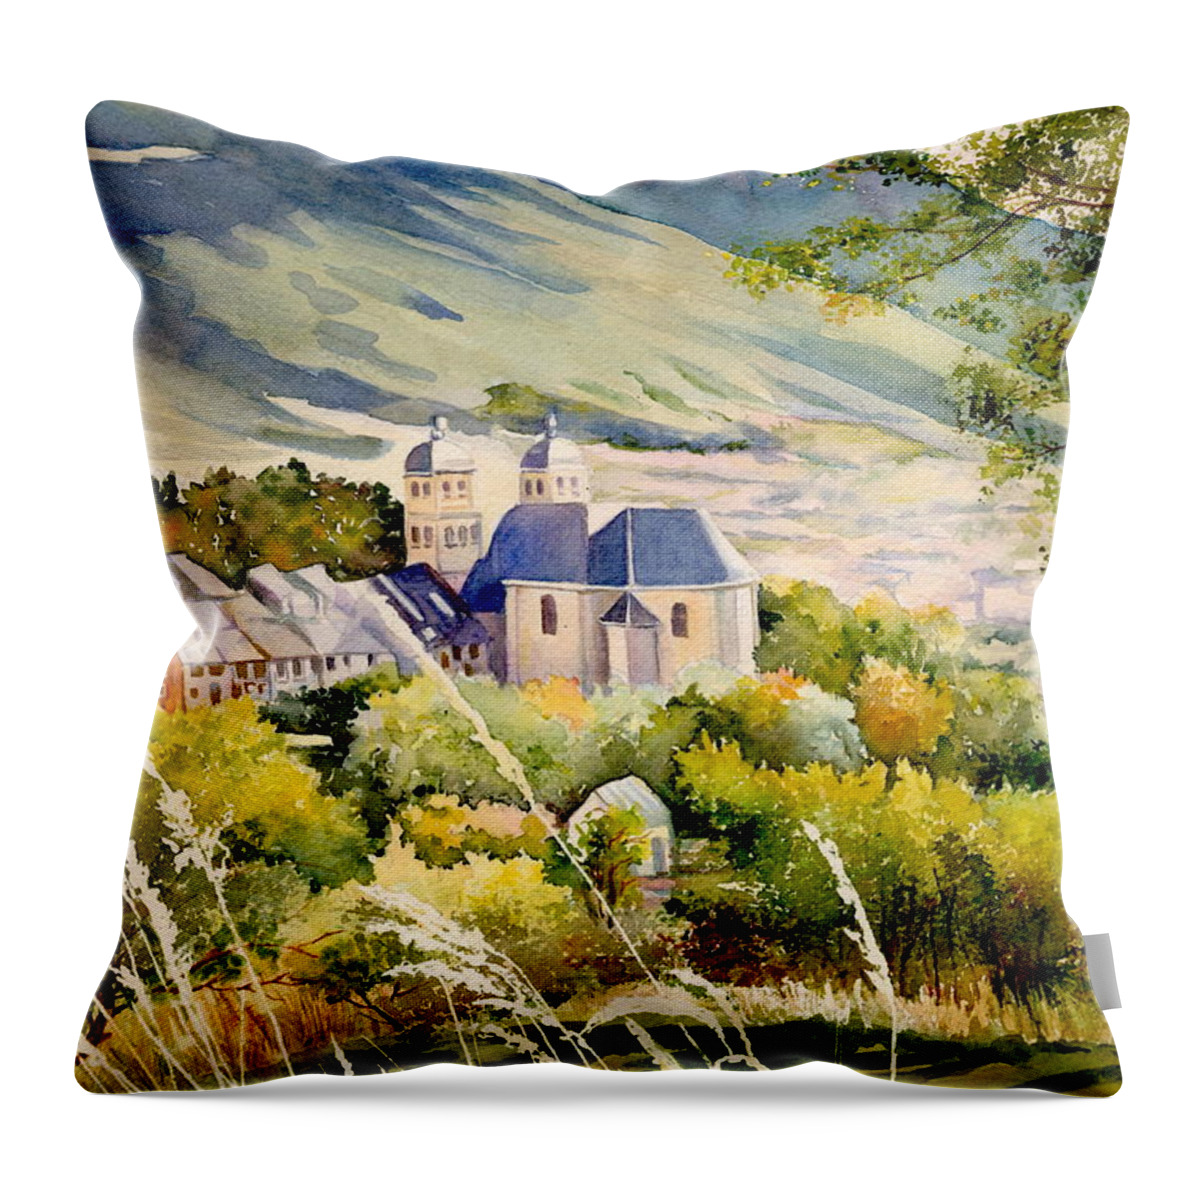 Briancon Throw Pillow featuring the painting Briancon - Route de la poste by Francoise Chauray